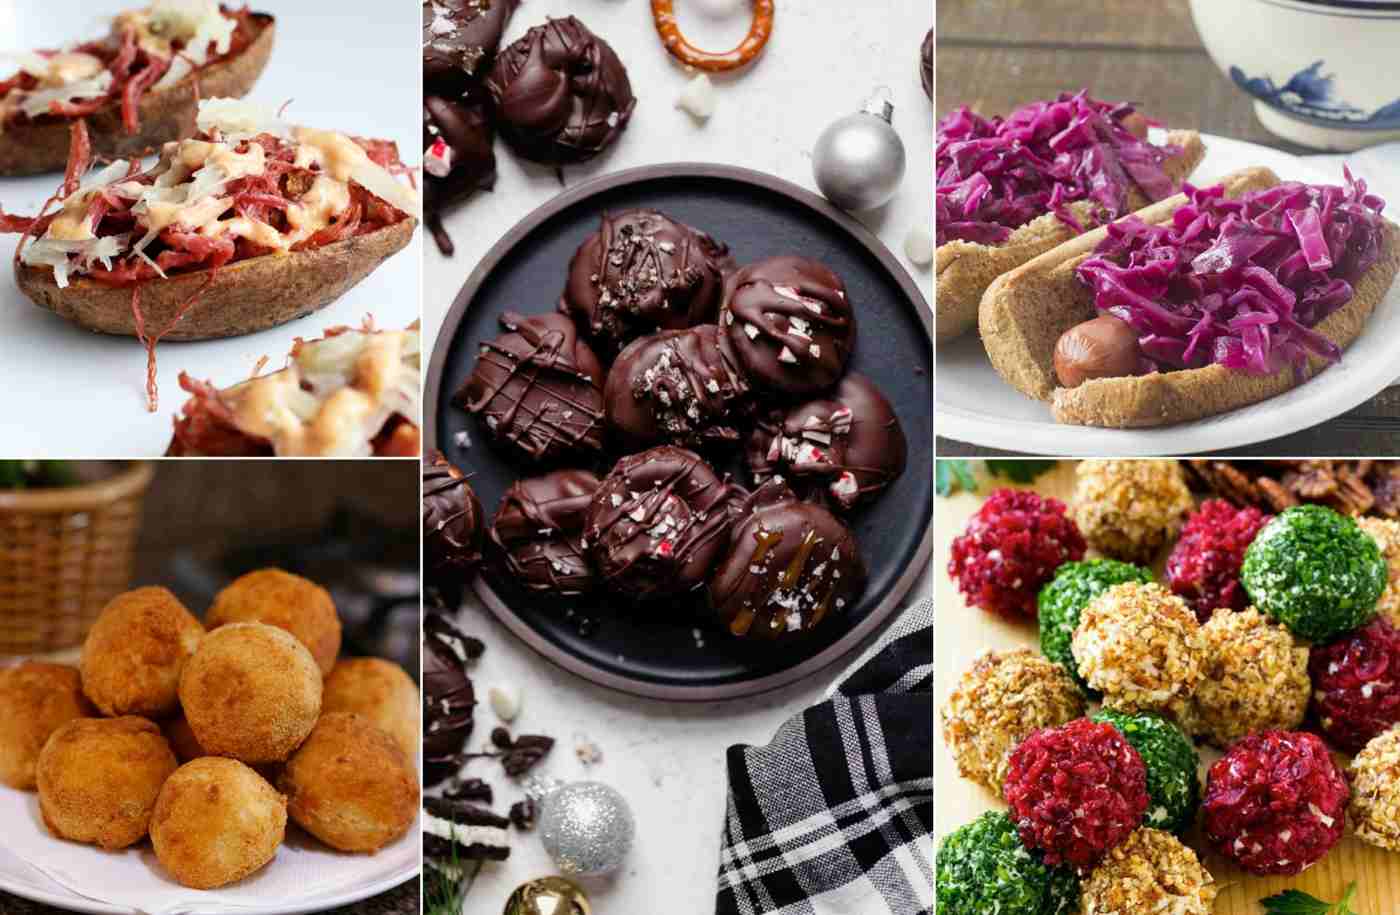 Oktoberfest recipes for the buffet at the party - snacks and dessert ideas